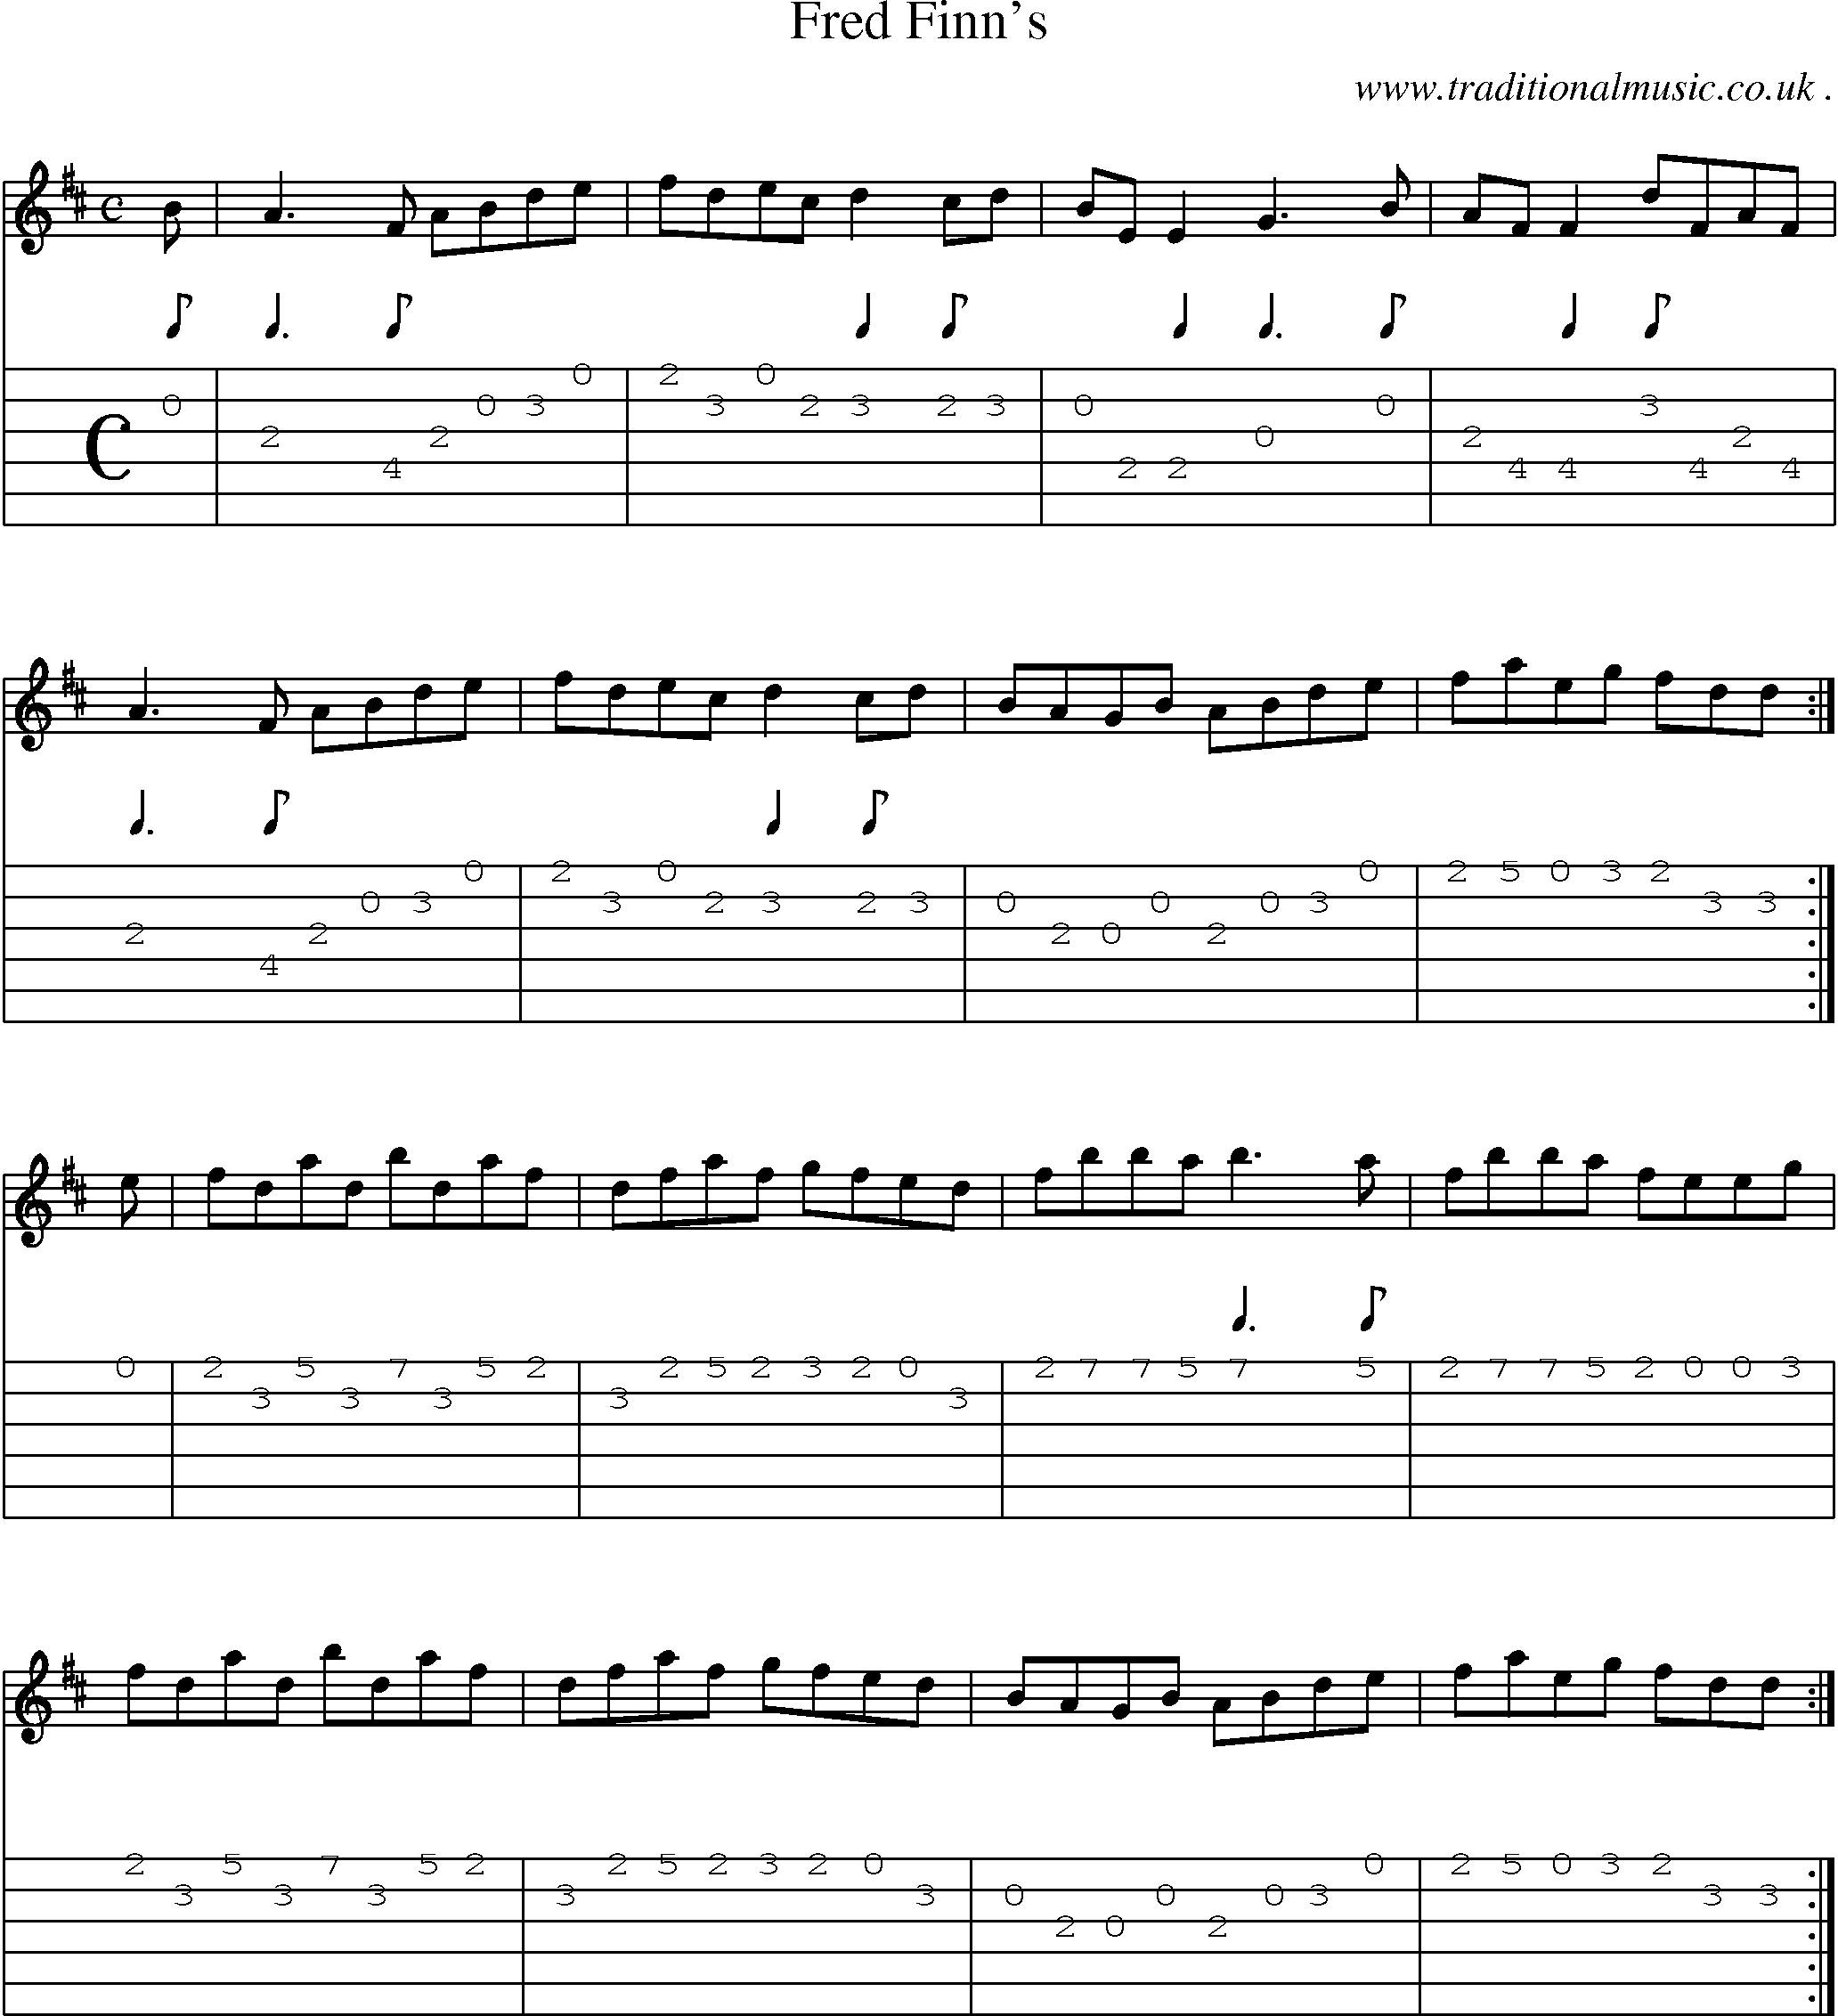 Sheet-Music and Guitar Tabs for Fred Finns